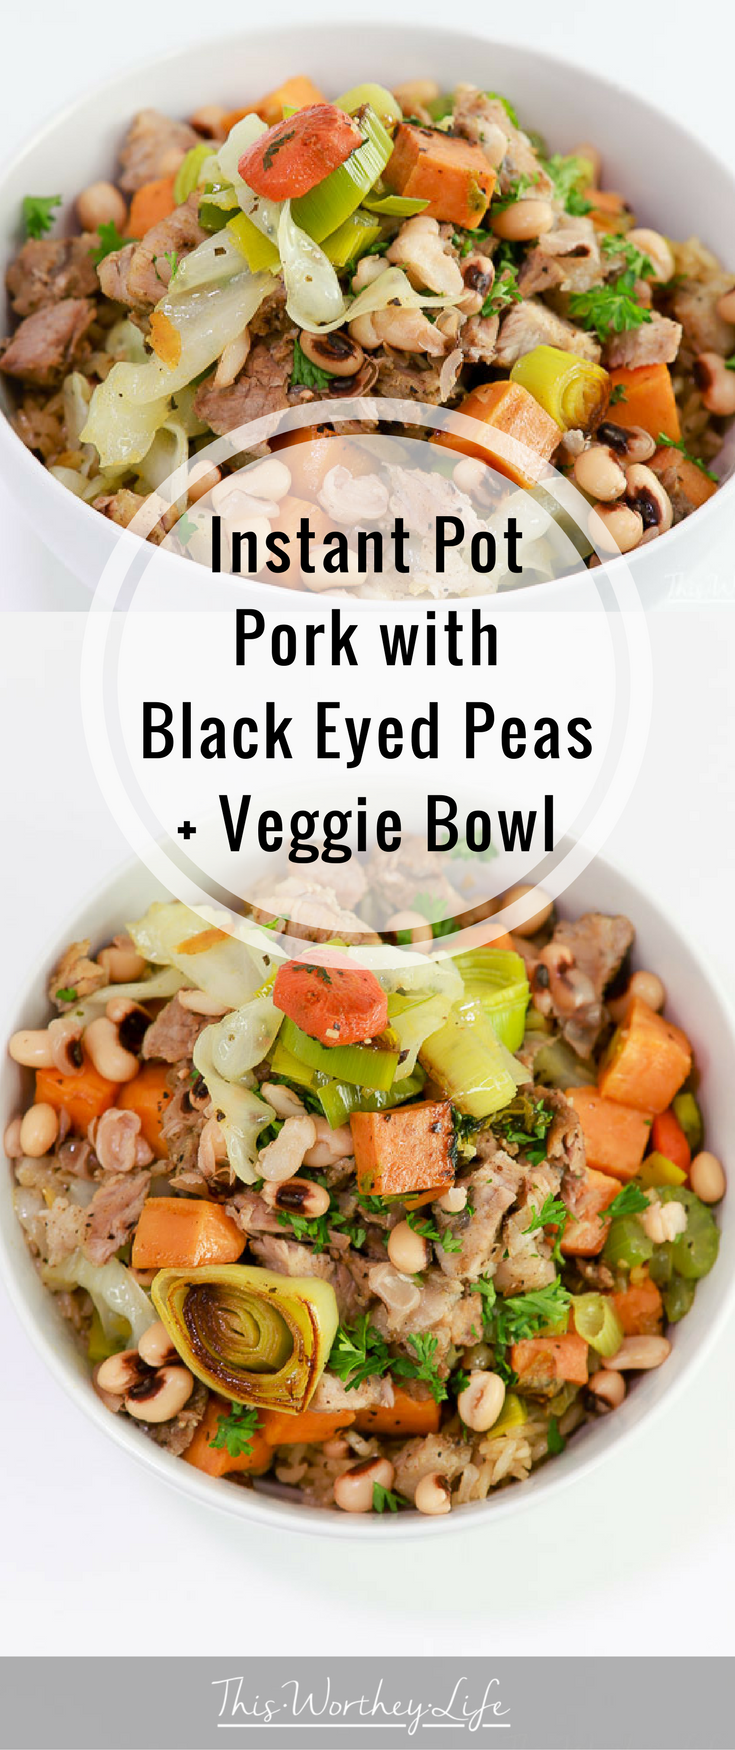 I've made roast over the years, but making a pork roast in the Instant Pot is a game changer. As we get ready for the New Year, I'm sharing our lucky New Year's Day recipe. It's pork, black-eyed peas, and fresh veggies all made in the Instant Pot. I've also added a new way to make a brown rice with black-eyed peas.